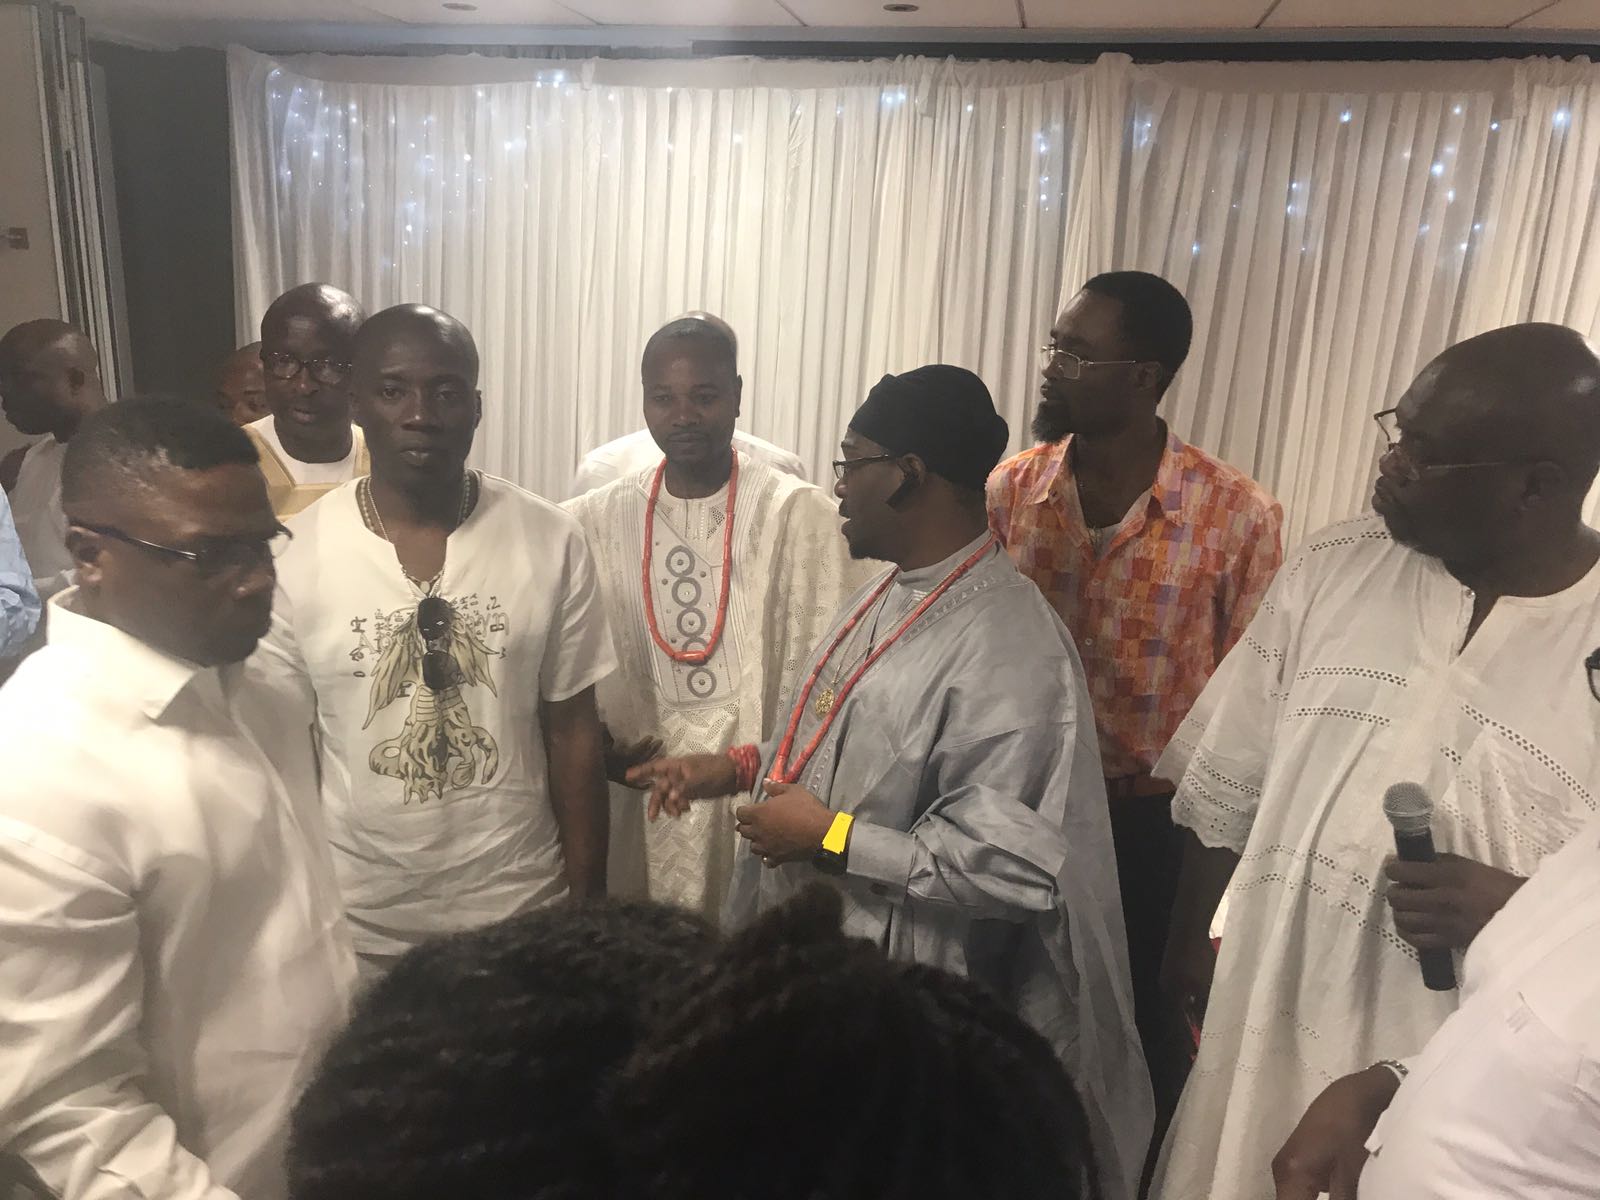 with groups of the Agbormen